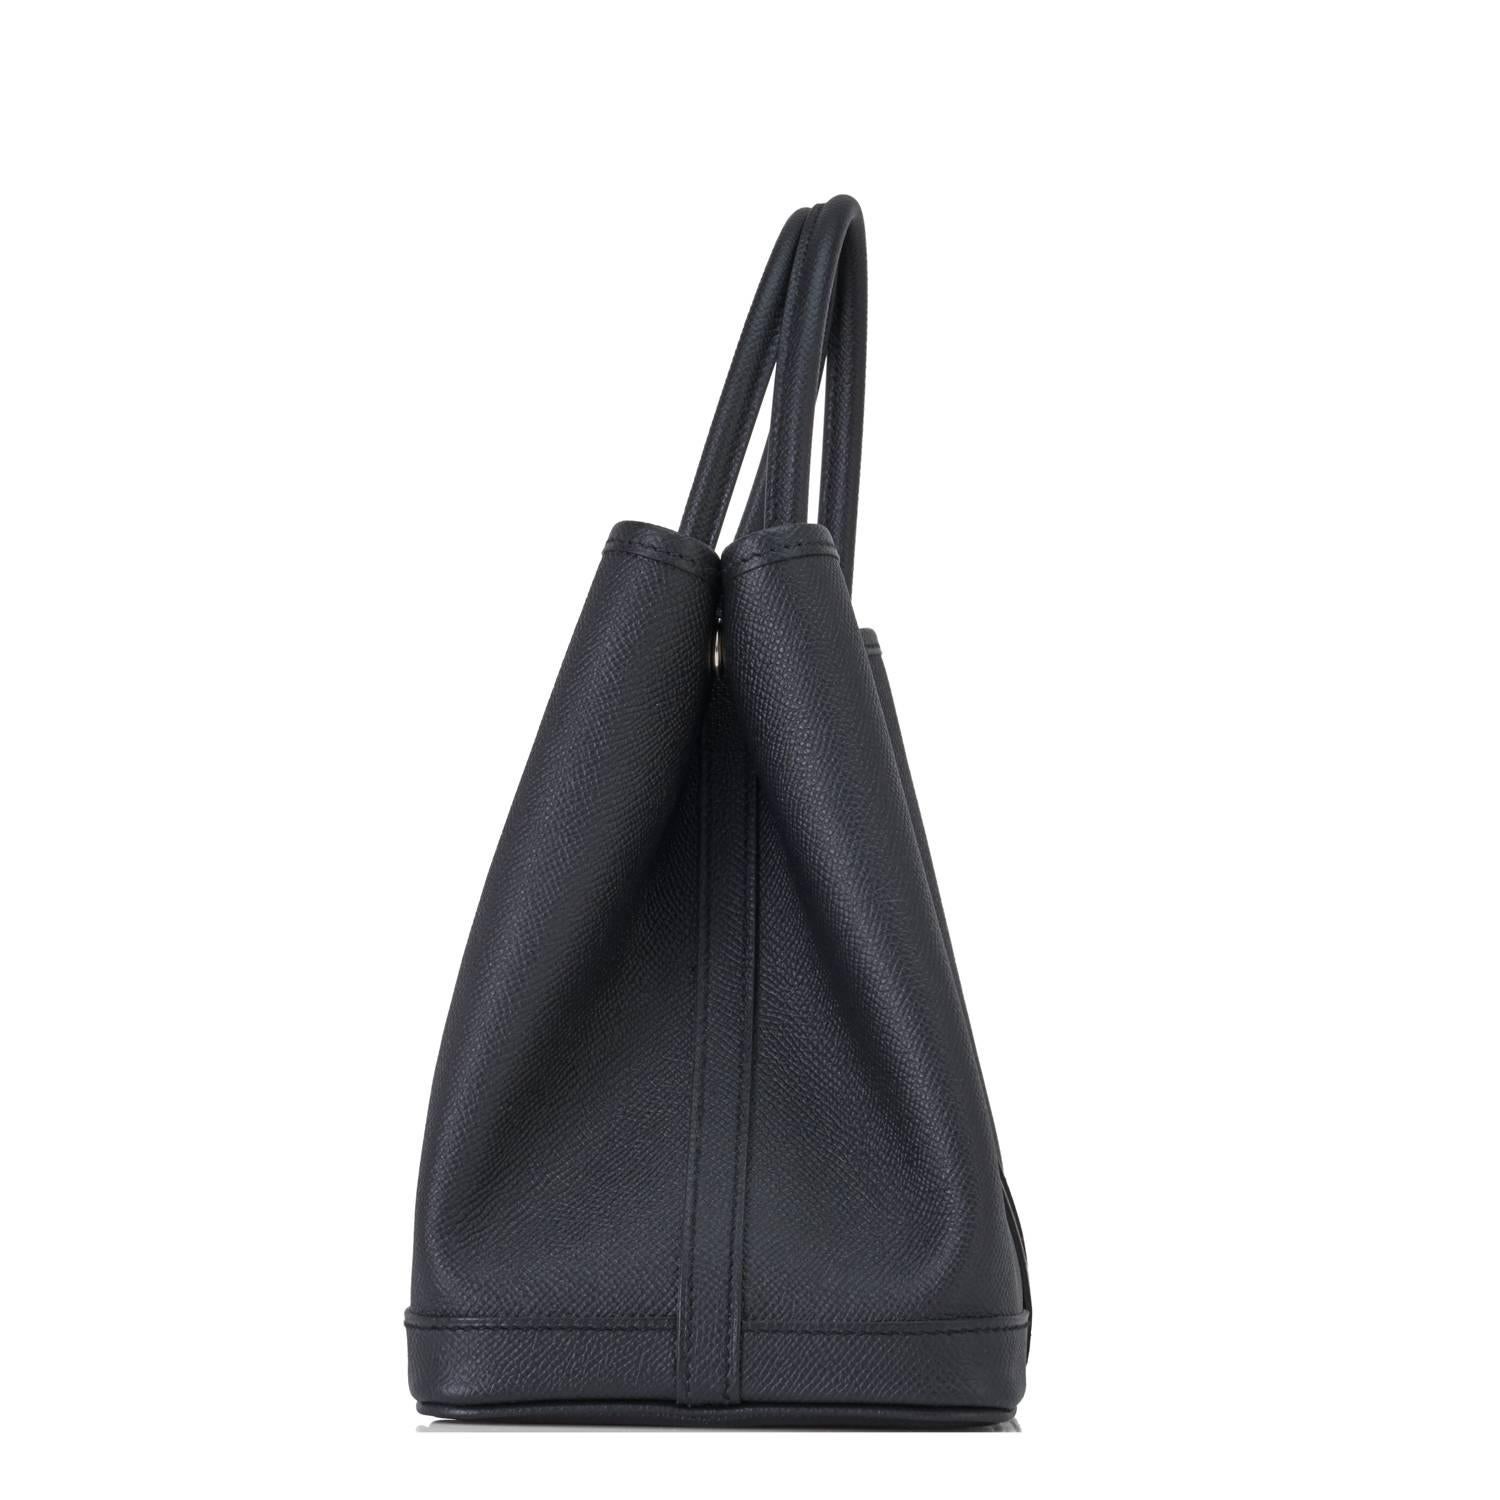 Hermes Black TPM Epsom Garden Party Tres Petite Modele Tote Bag 30cm Rare
Brand New in Box.  Store fresh. Pristine condition.
Perfect gift! Comes with Hermes sleeper and signature orange box.
Hermes Garden Party in Black Epsom is an uber elegant